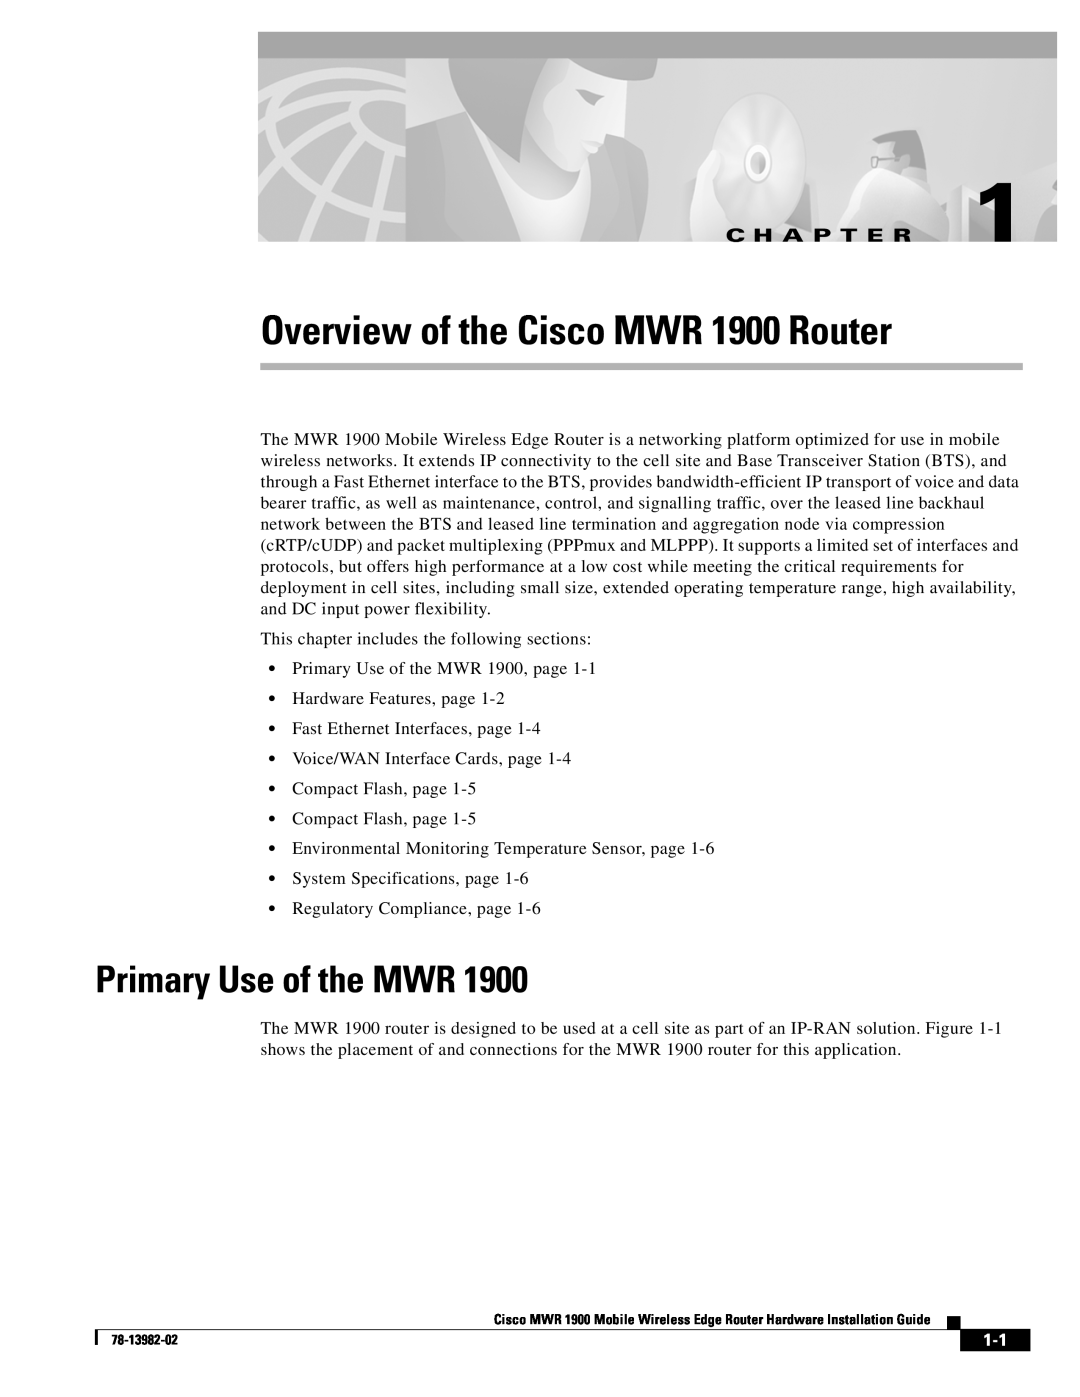 Cisco Systems manual Overview of the Cisco MWR 1900 Router, Primary Use of the MWR, C H A P T E R 